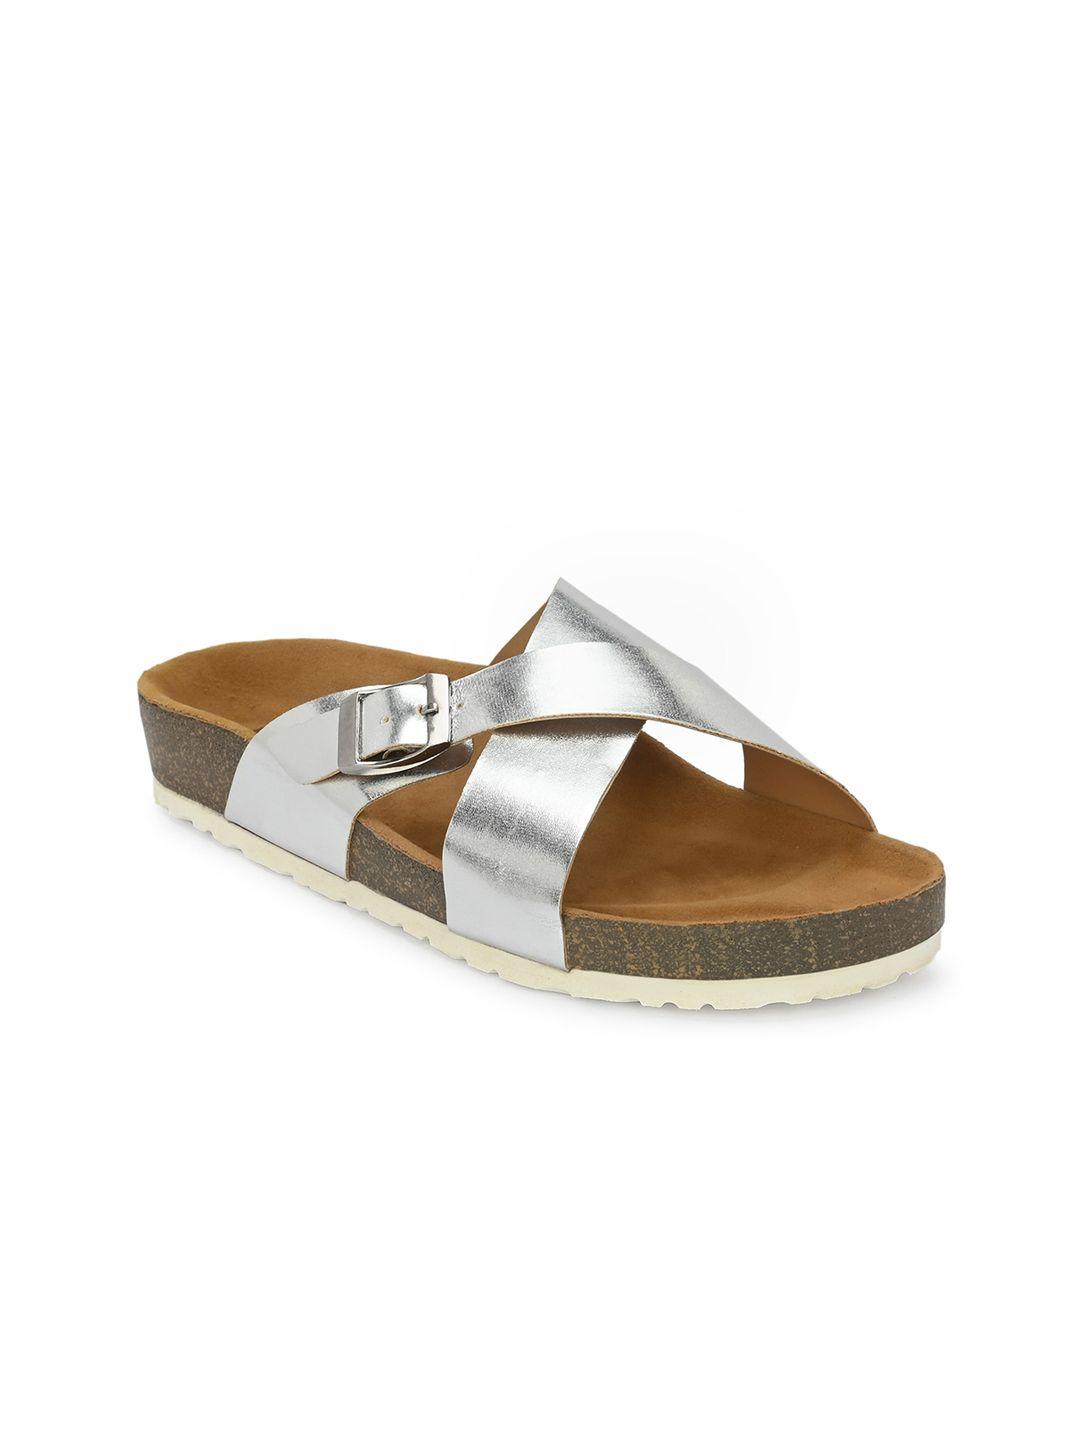 here&now silver-toned & brown buckle detail cross strap open toe flats